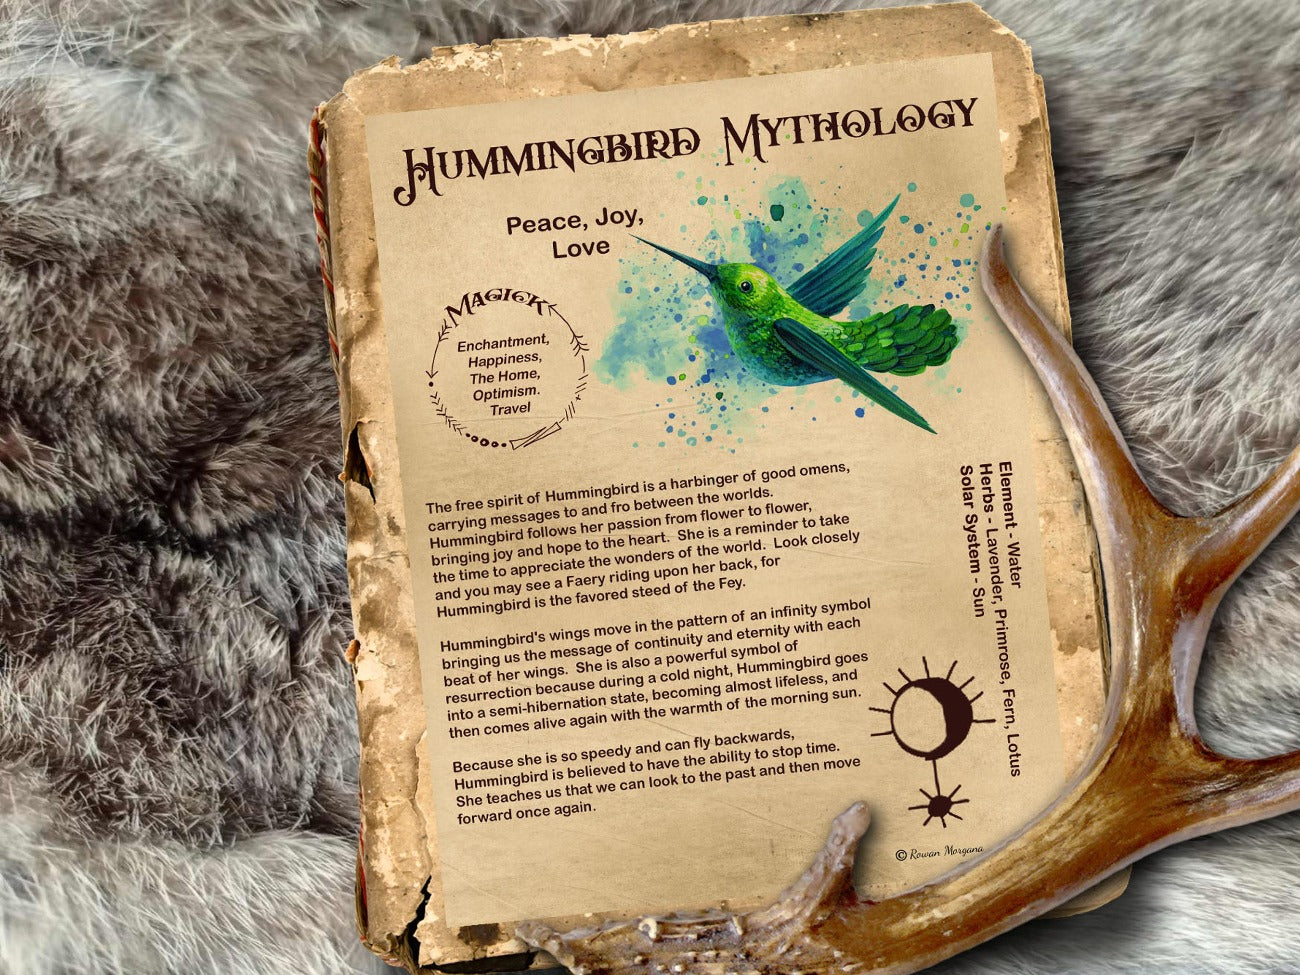 Hummingbird Magick Myths & Correspondences 1 printable Book of Shadows Page is displayed in an ancient book on a fur rug with a deer antler. Shown with the parchment background.